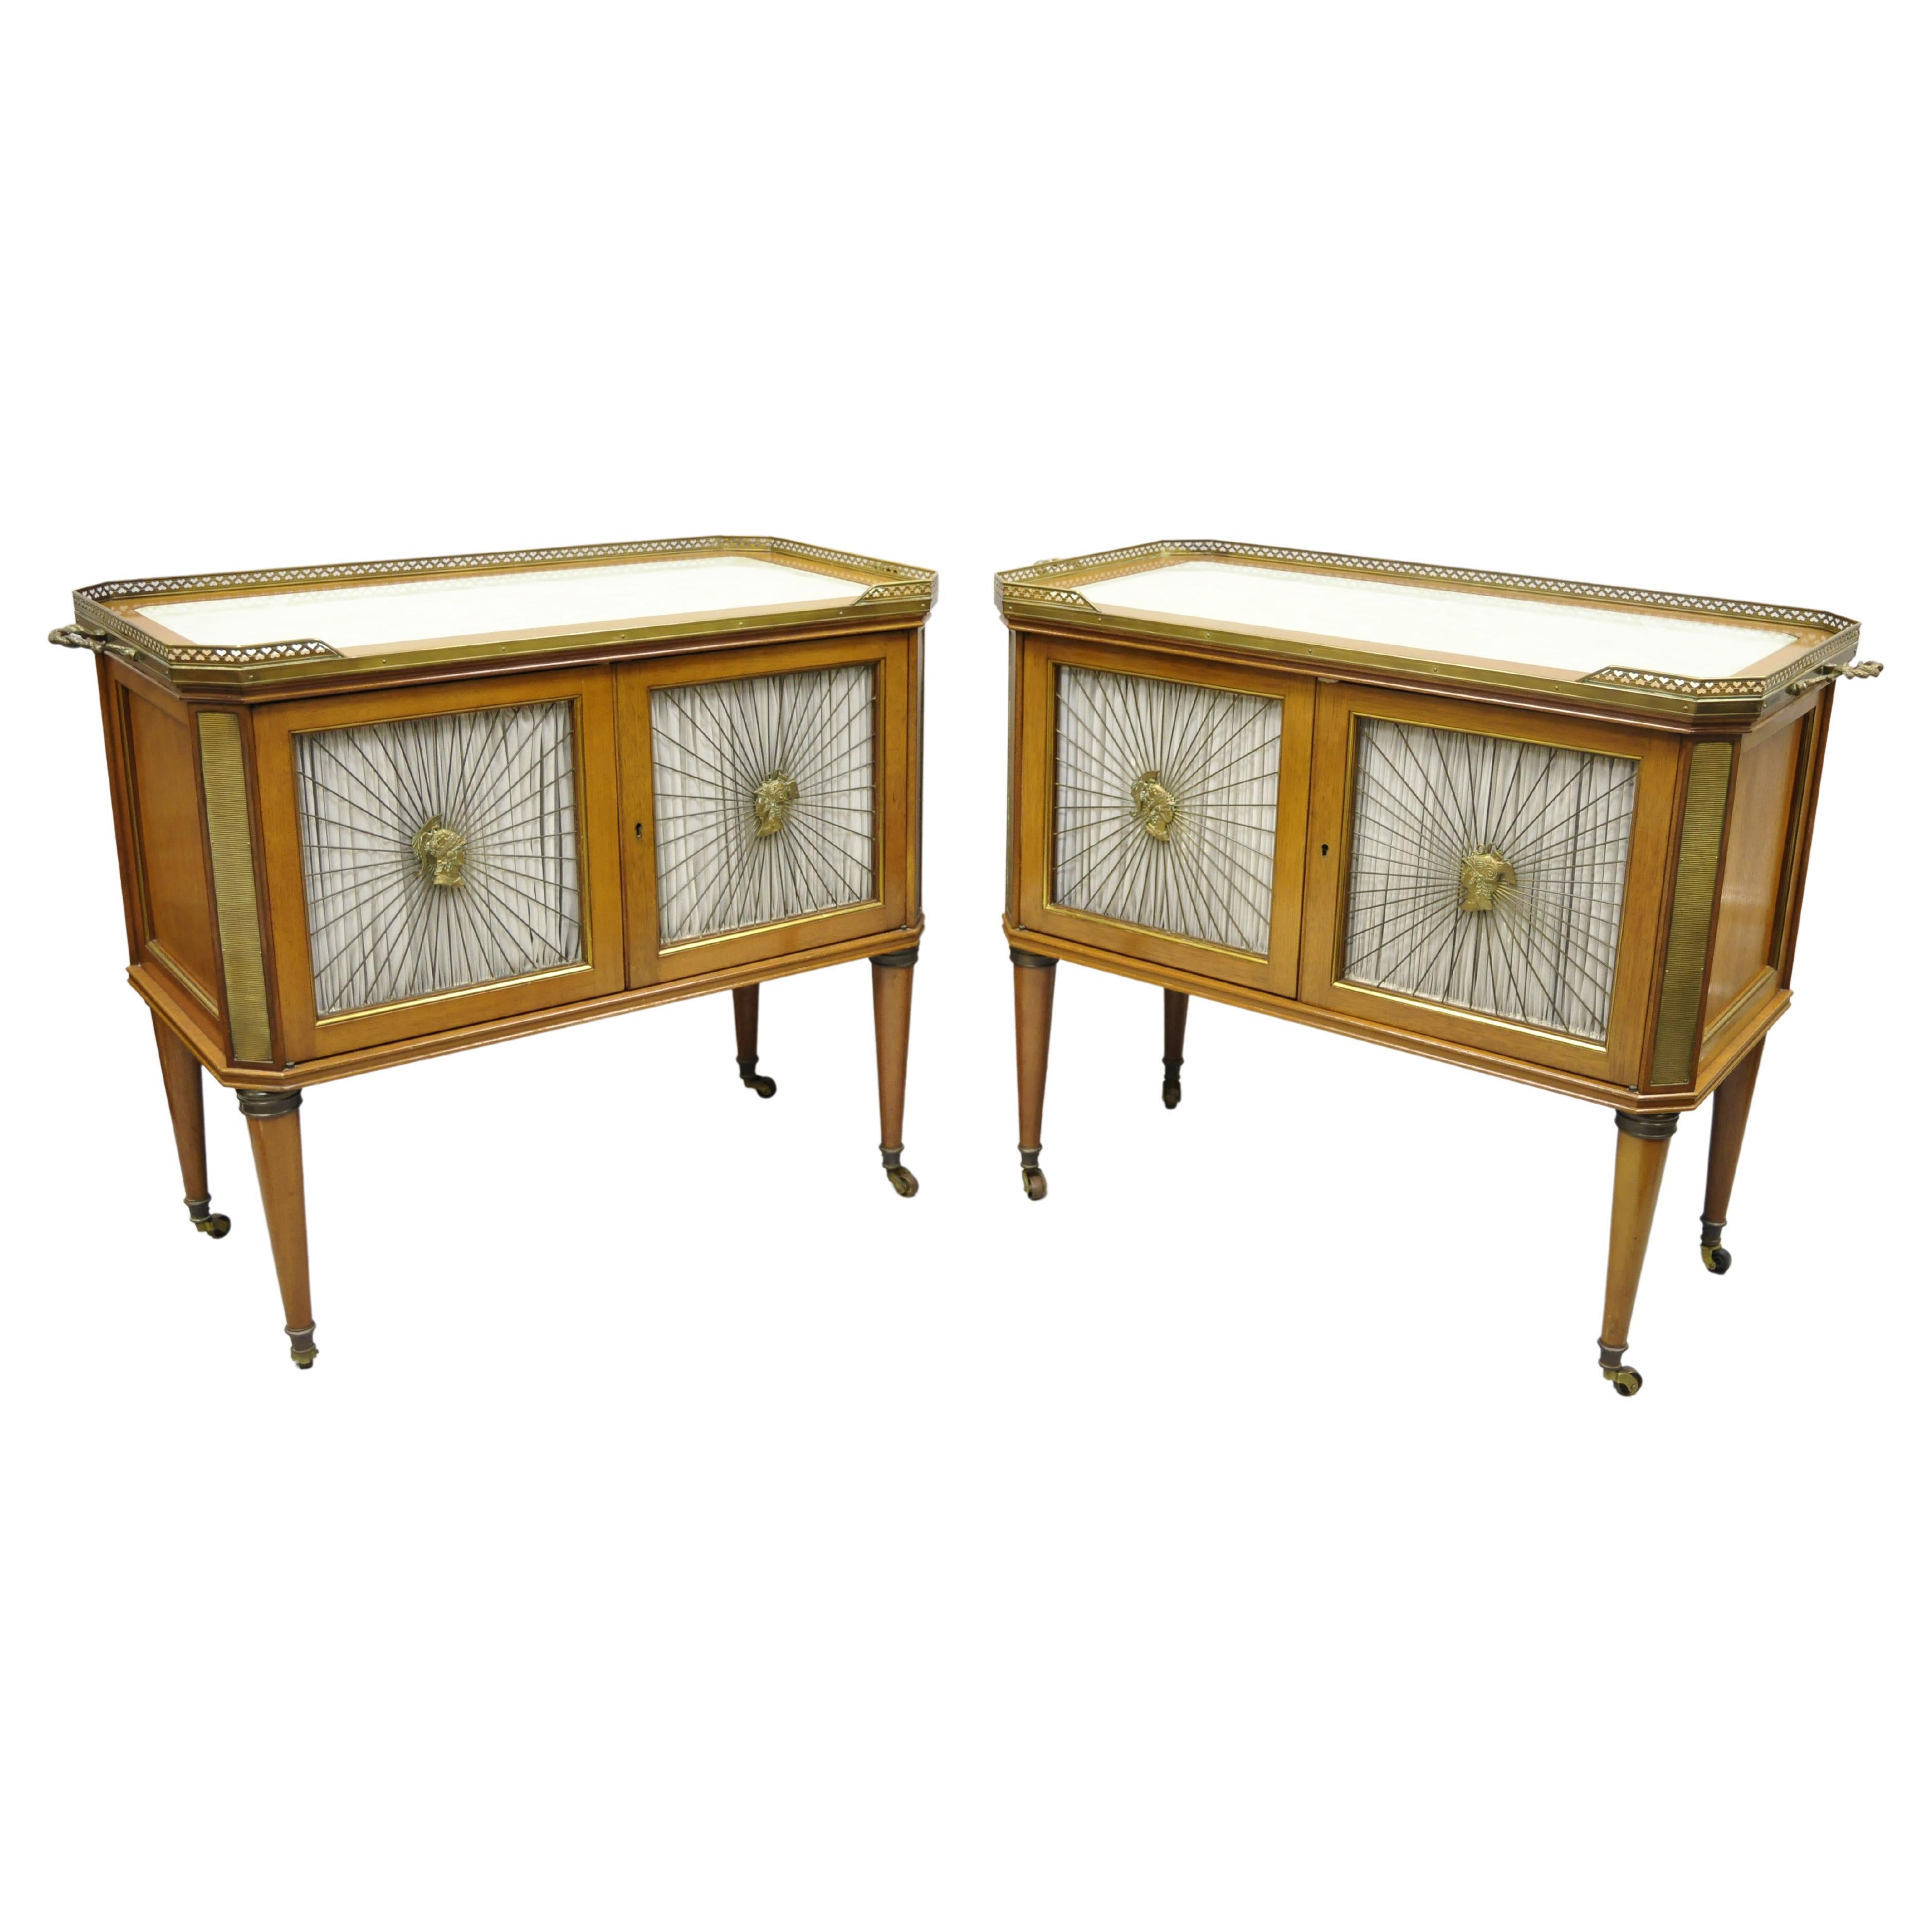 French Louis XVI Neoclassical Regency Mahogany Server Cabinet Tables, a Pair